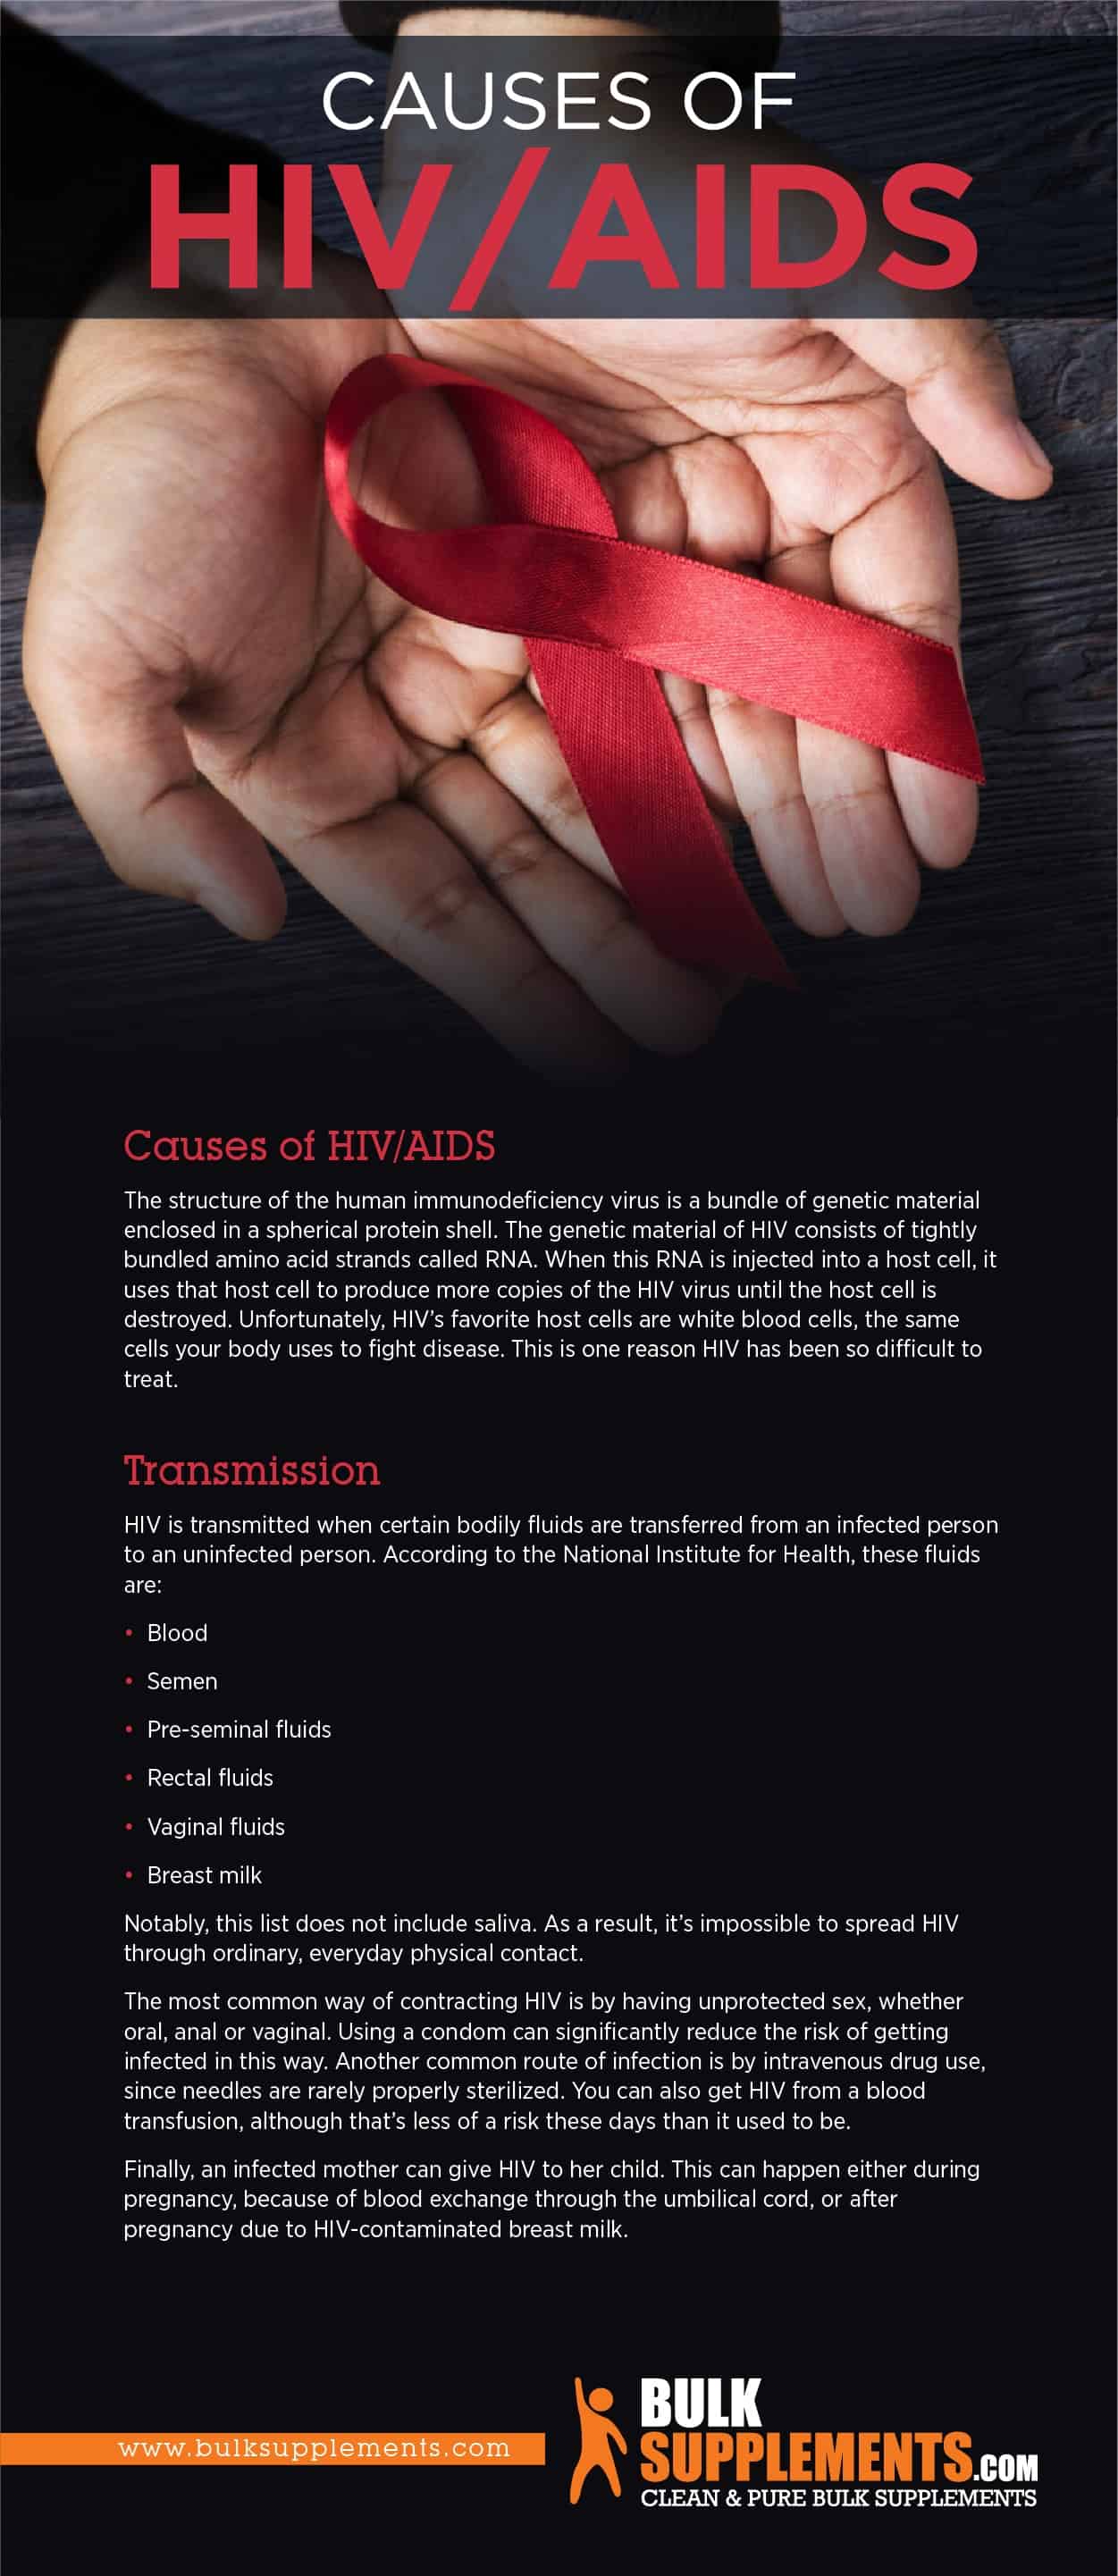 Causes of HIV/AIDS